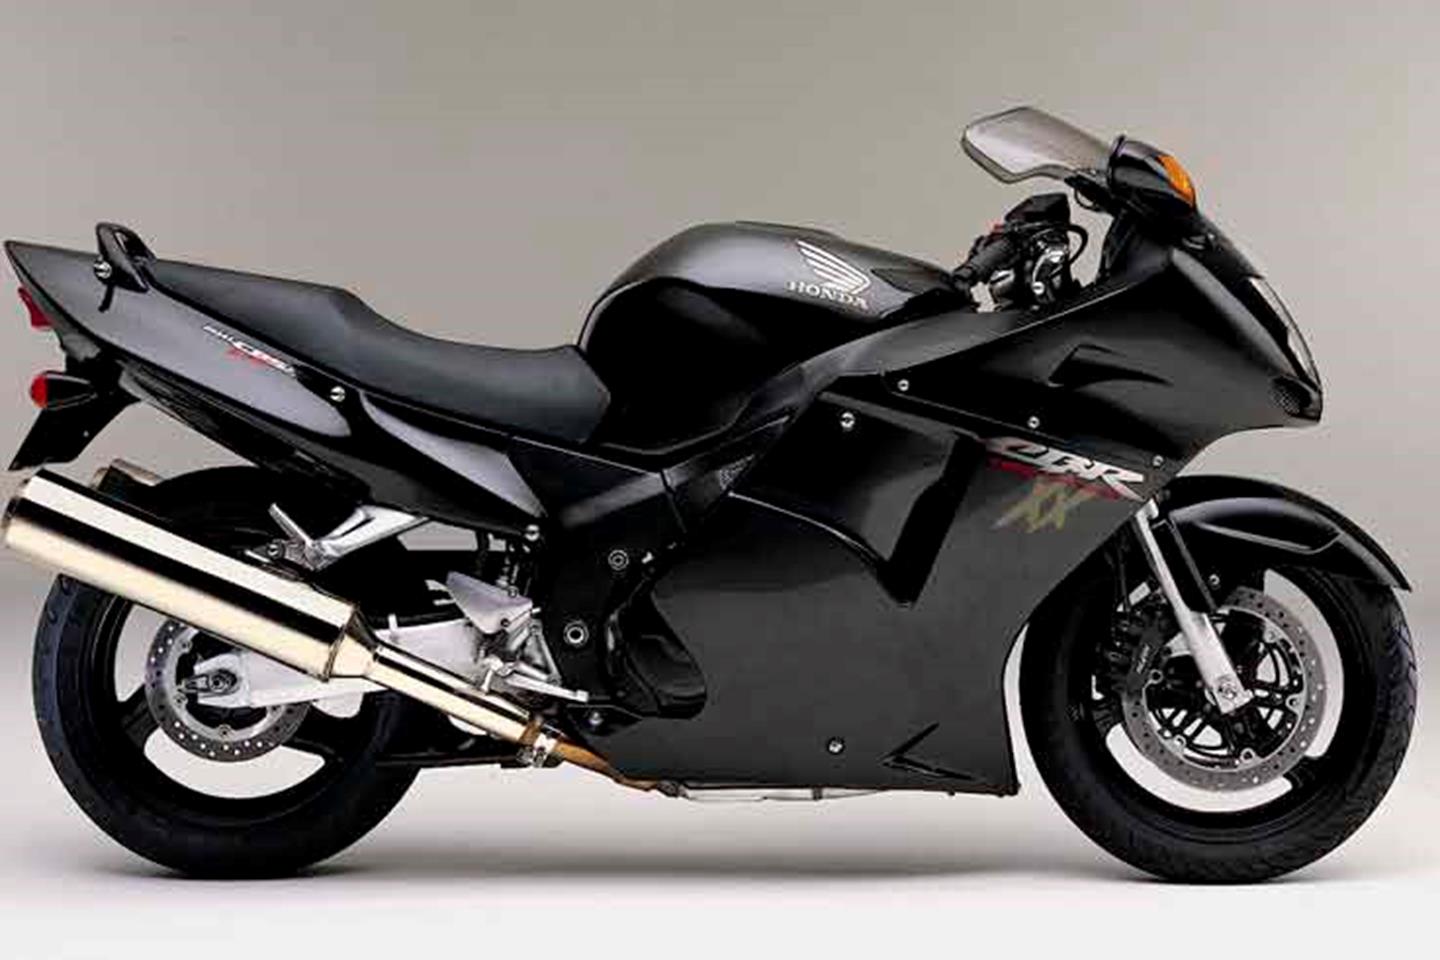 Honda Blackbird (1997-2005) review and used buying guide | MCN